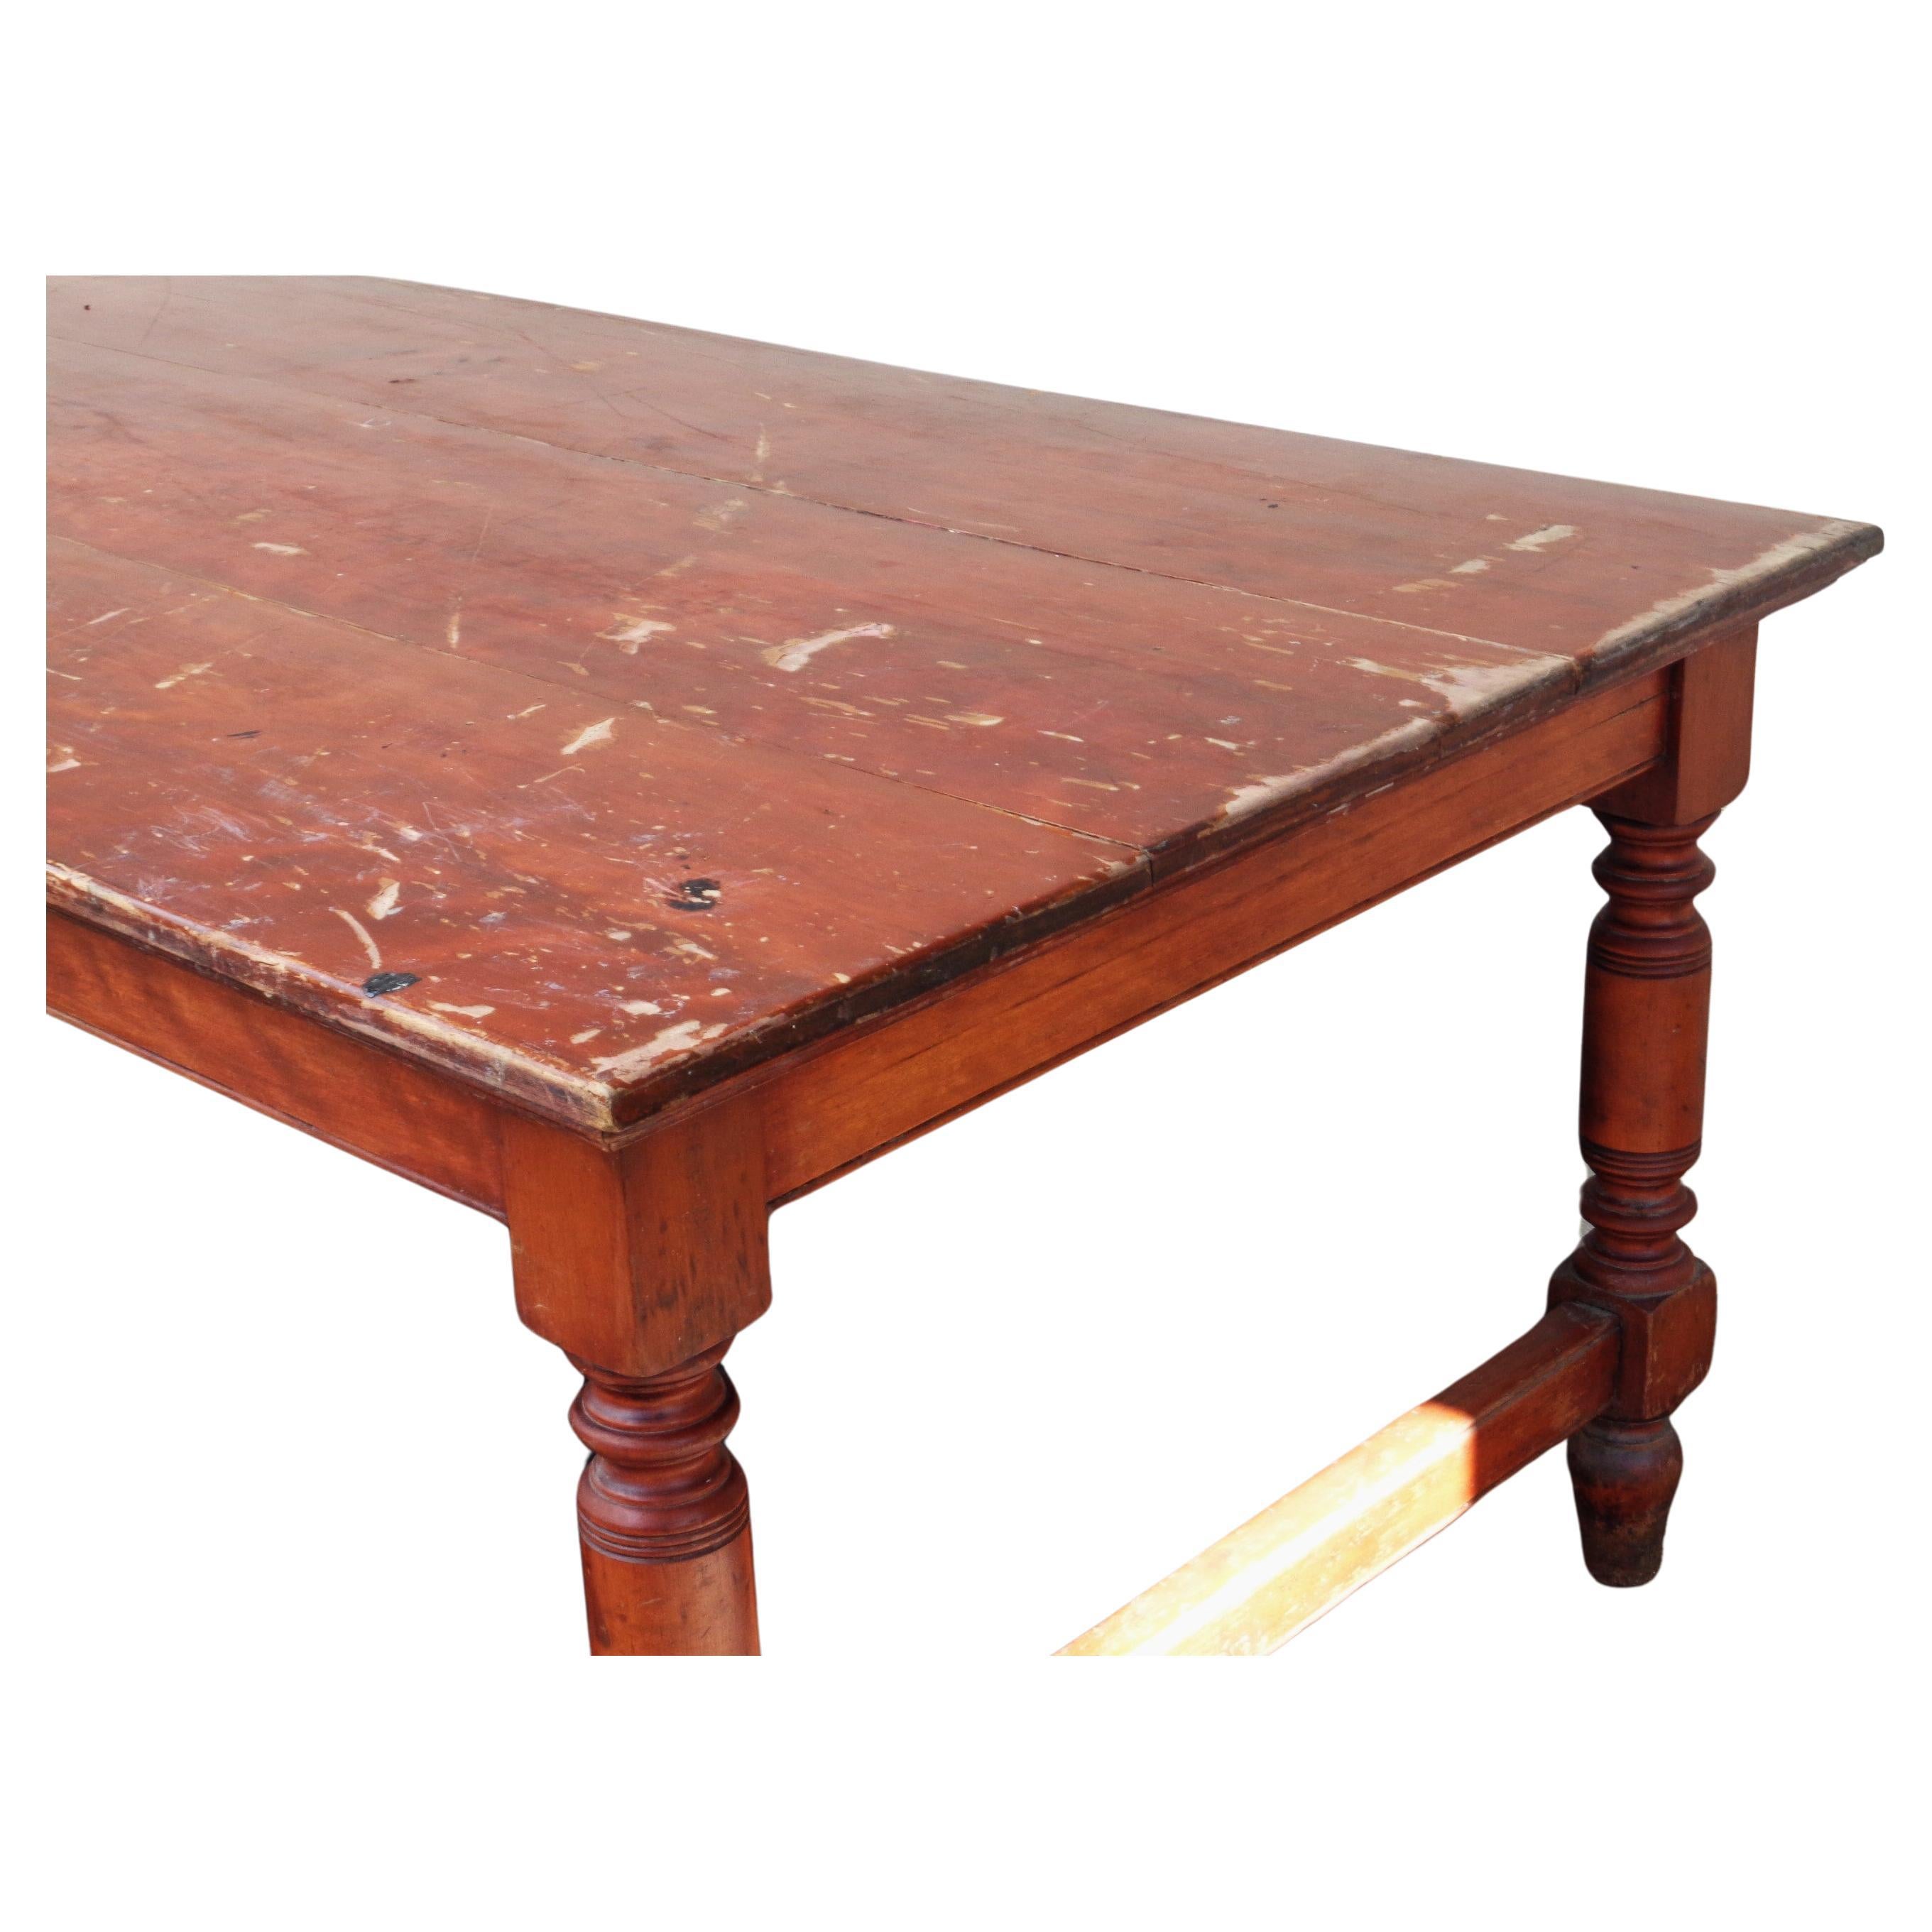 Antique American Banquet Dining Table, 1870-1880 For Sale 1